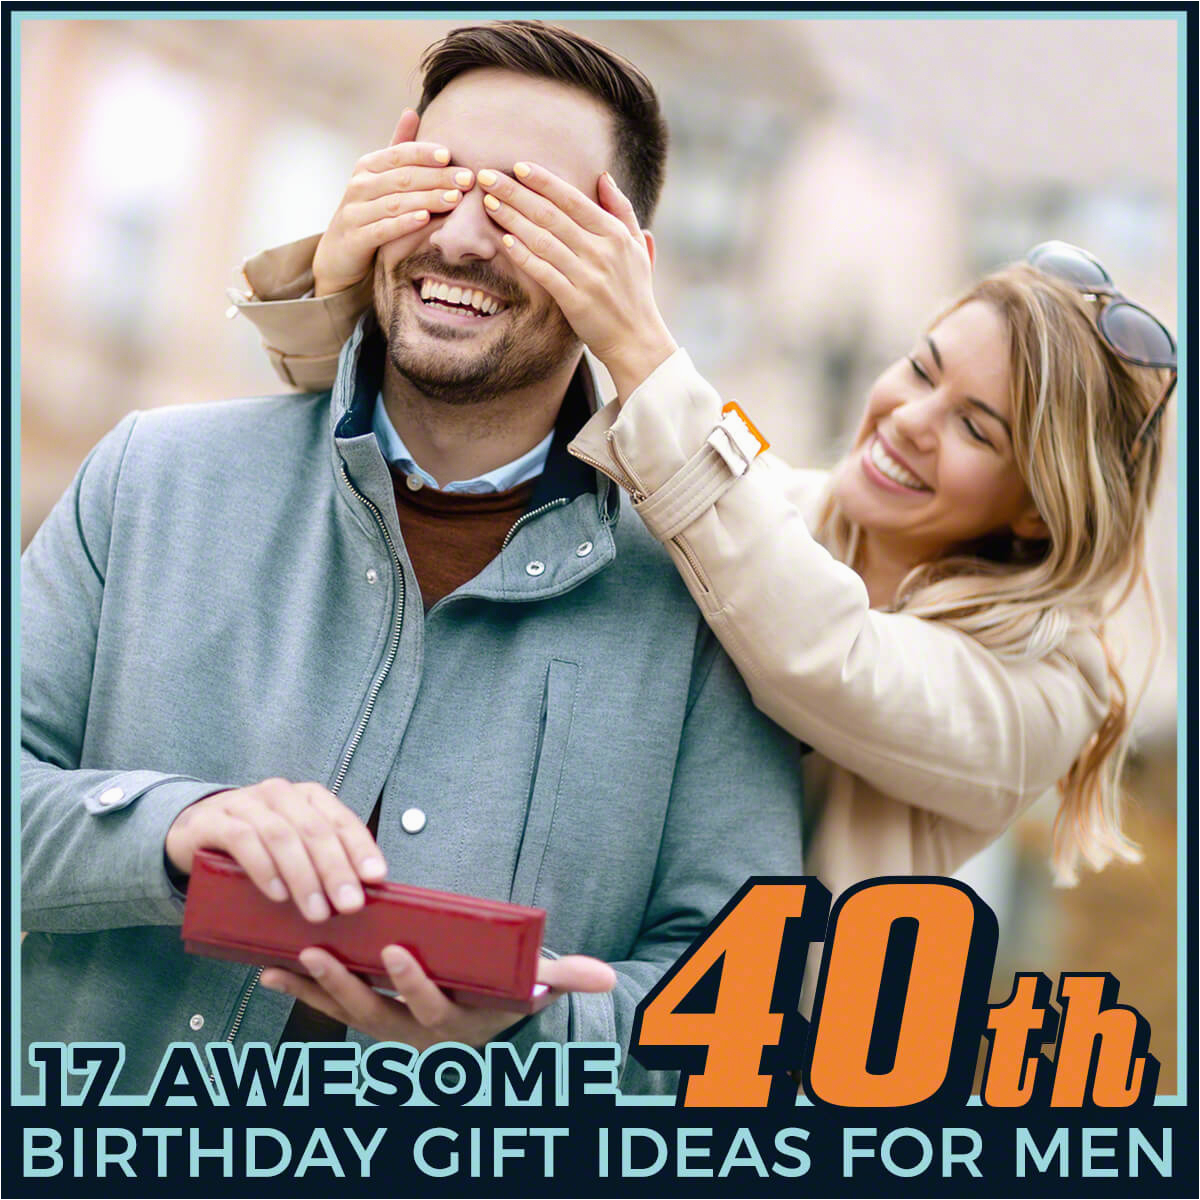 17 awesome 40th birthday gift ideas for men